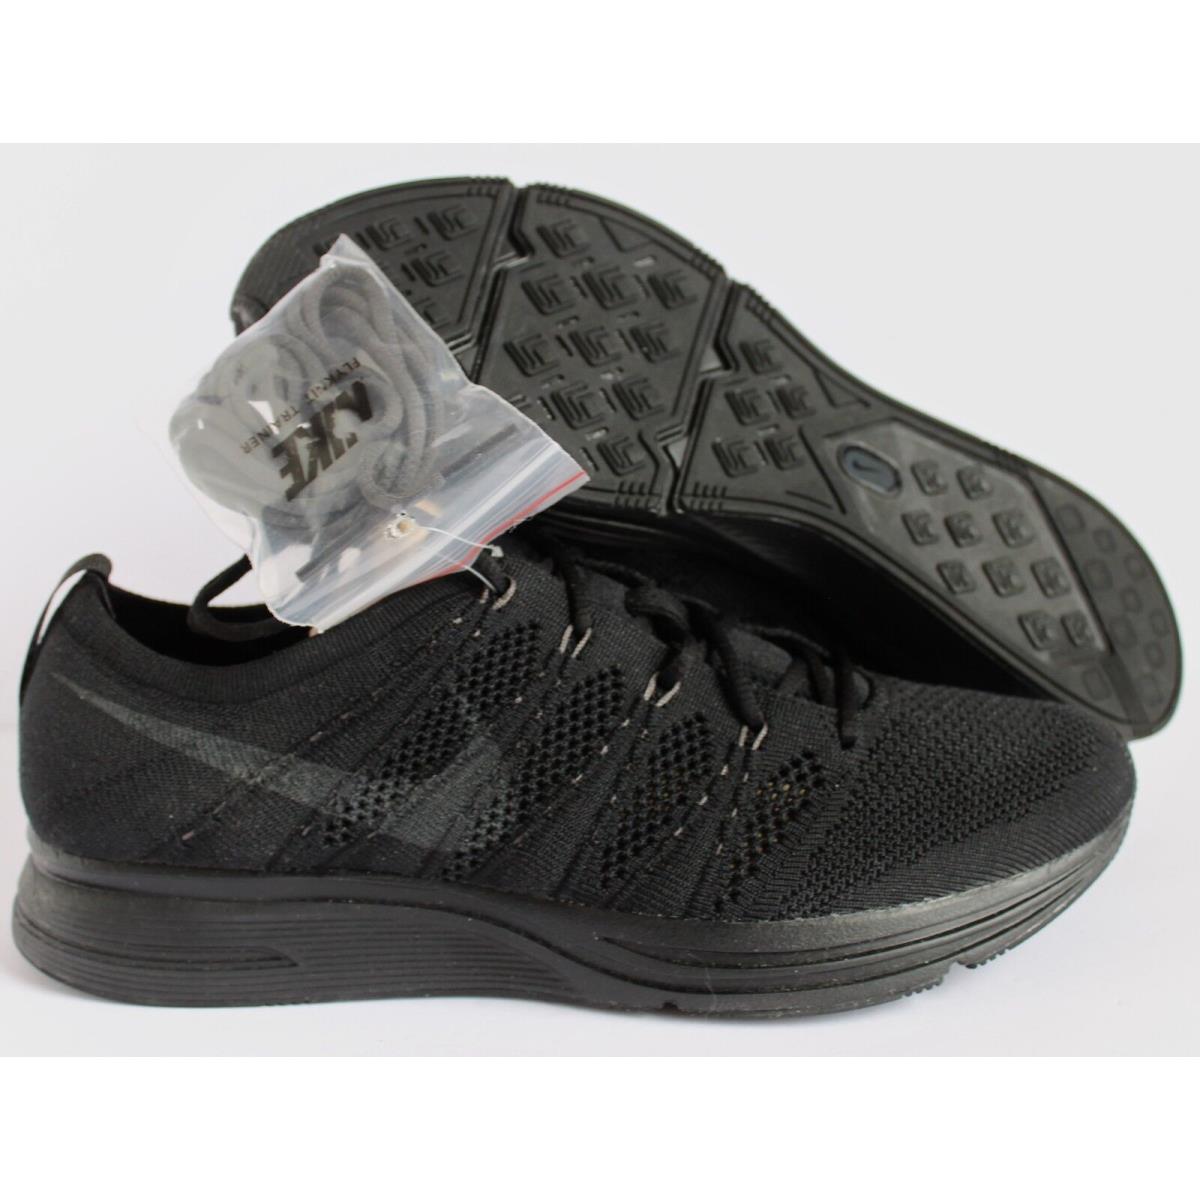 Nike Flyknit Trainer Triple Black Anthracite Men`s 7 // Wmns 8.5 AH8396-004 | 887231009817 - Nike shoes Flyknit - Black Anthracite | SporTipTop